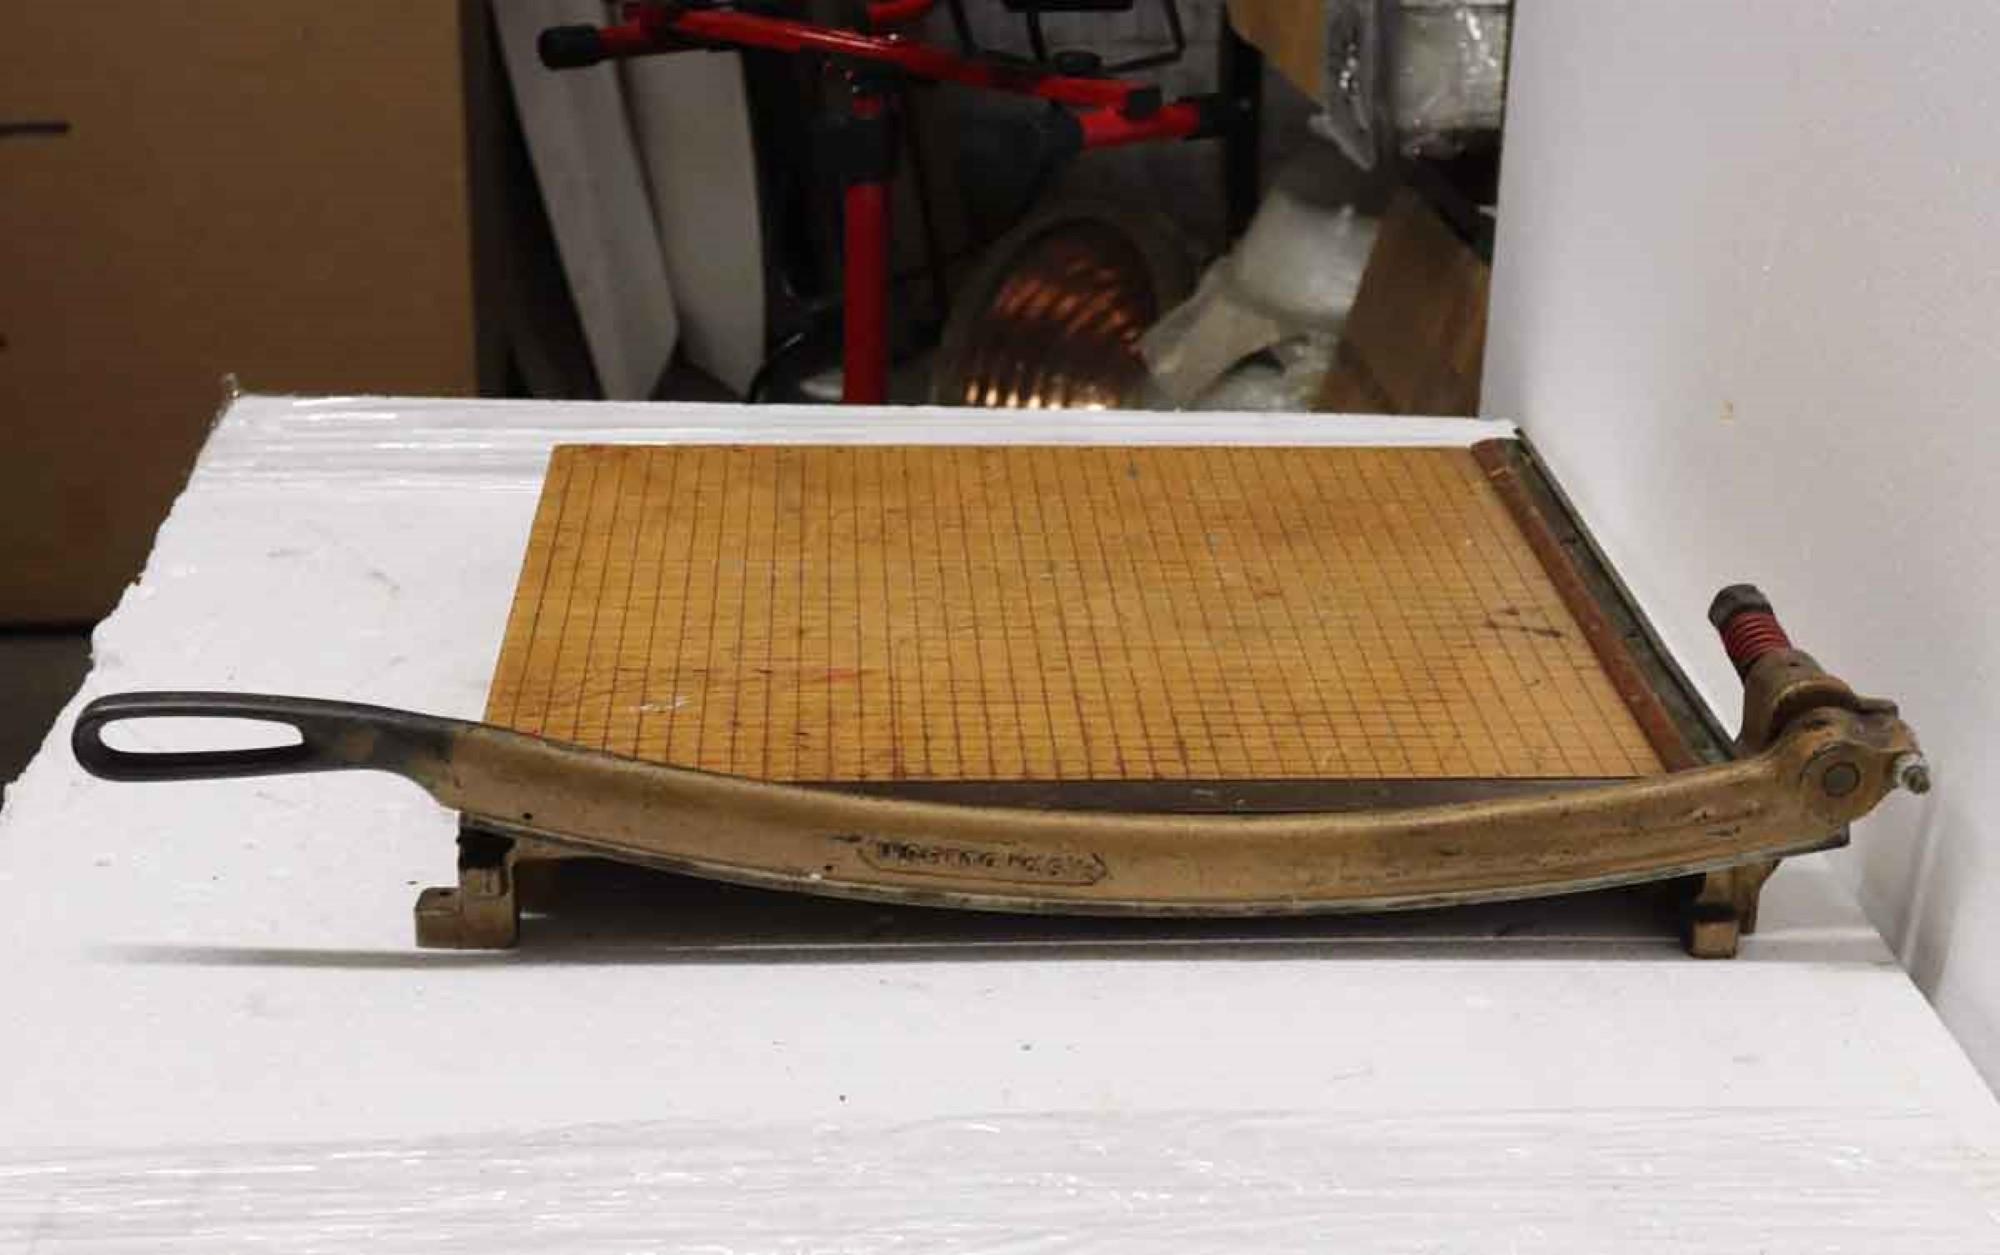 Early 20th Century 1920s High School Art Class Wood & Steel Paper Cutter with Built-In Ruler Guides